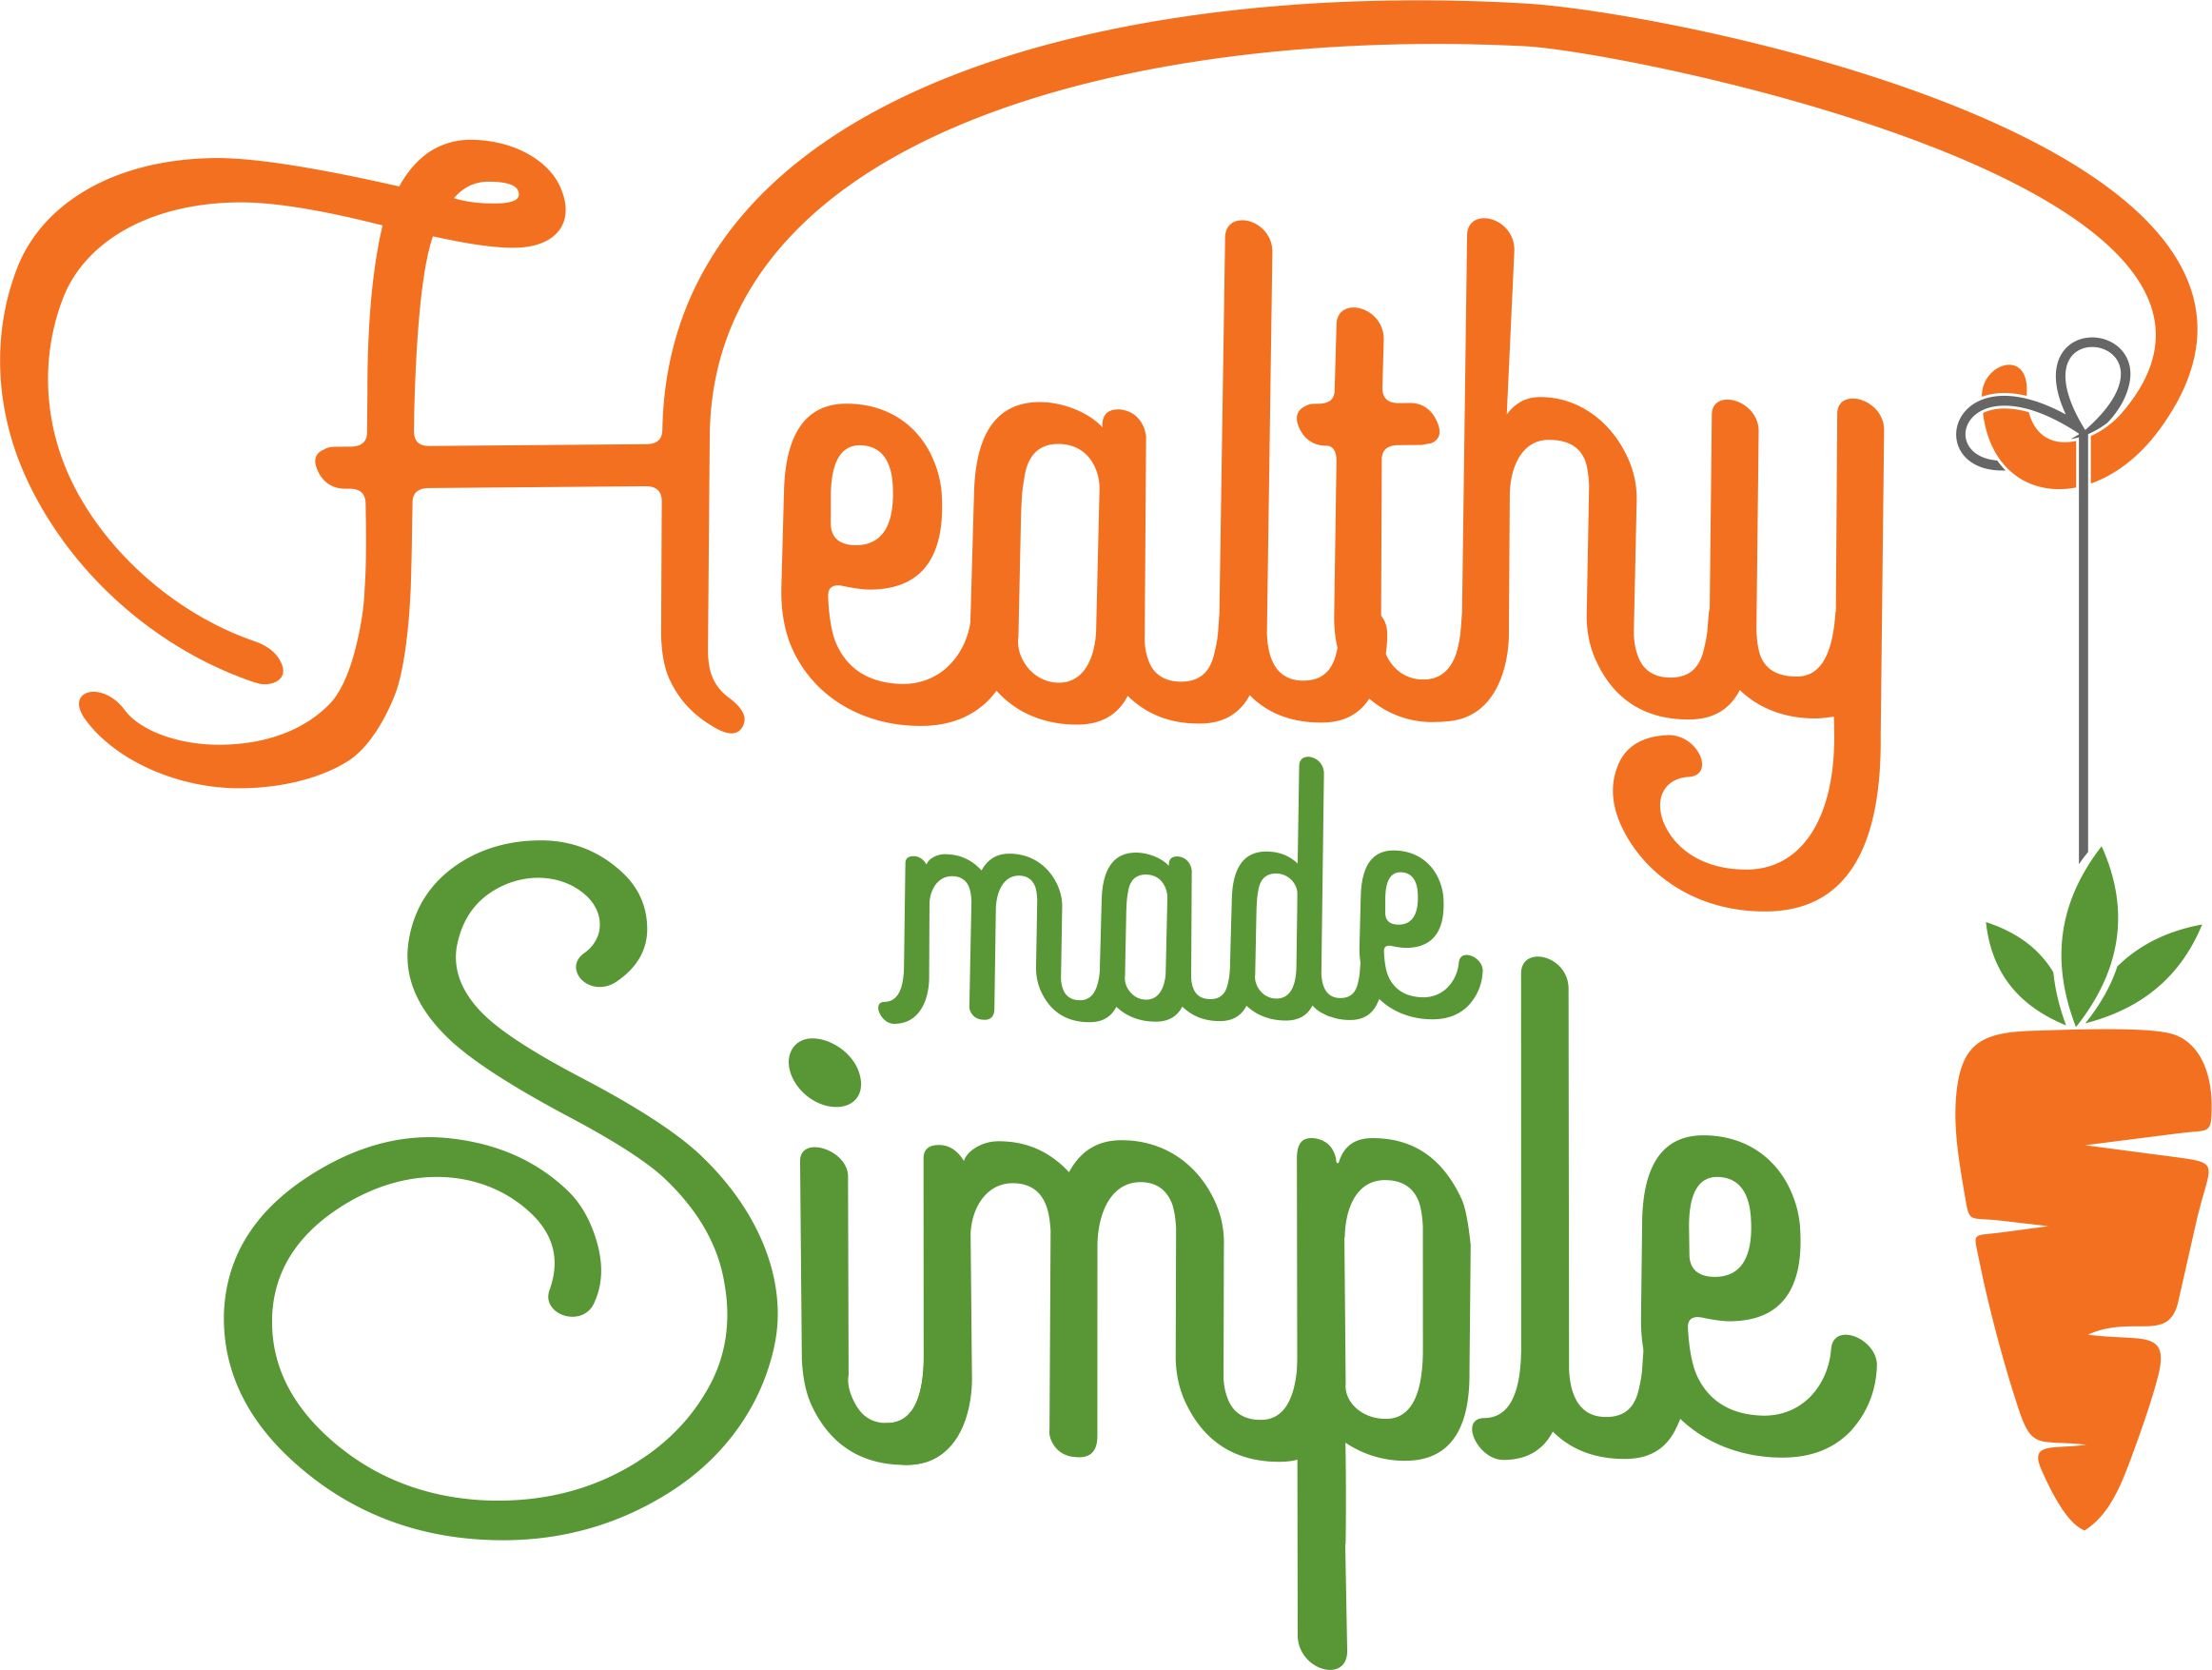 Healthy Made Simple is a local fresh meal delivery service that delivers a variety of chef prepared meals that are pre-portioned and ready to heat and eat.